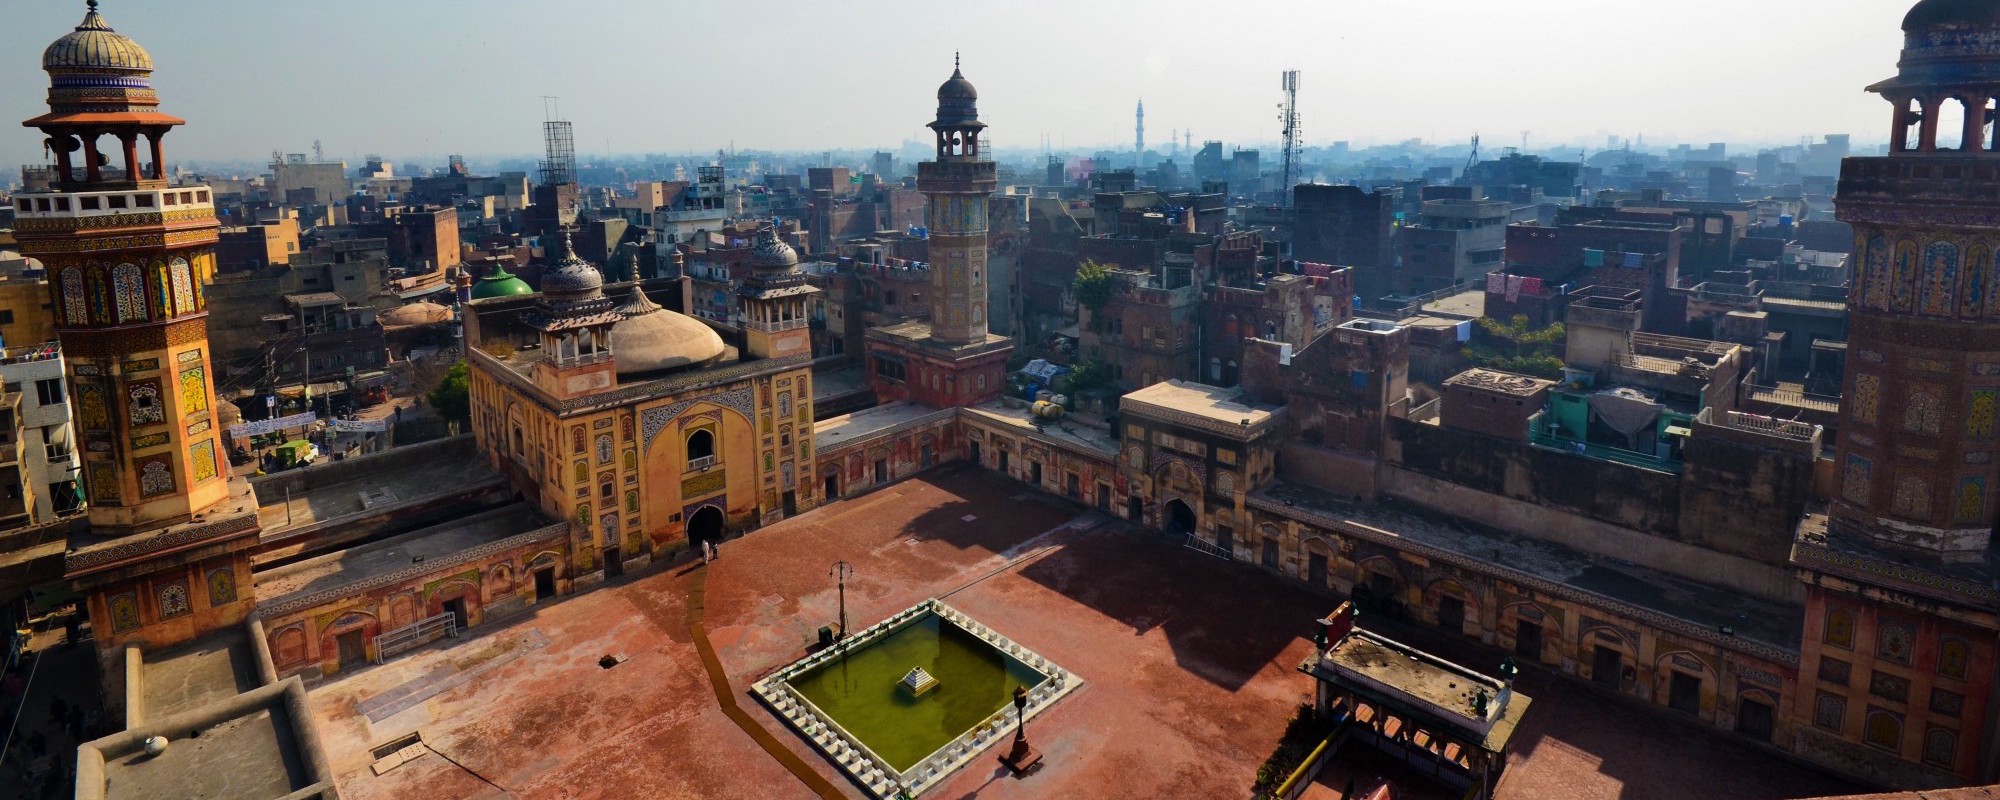 A view of the Lahore skyline.